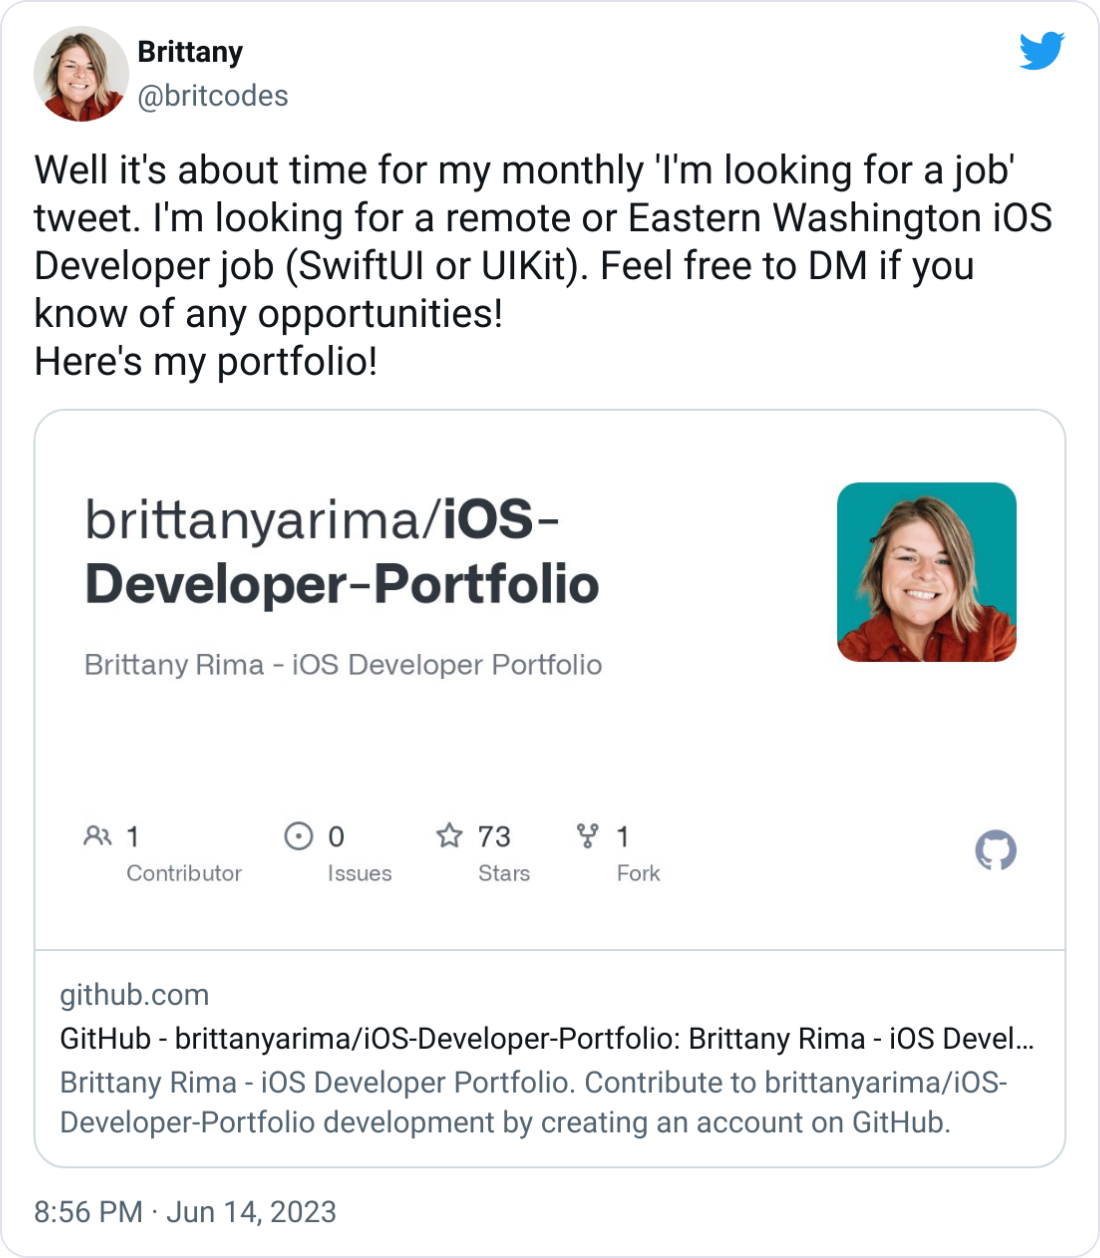 Brittany @britcodes Well it's about time for my monthly 'I'm looking for a job' tweet. I'm looking for a remote or Eastern Washington iOS Developer job (SwiftUI or UIKit). Feel free to DM if you know of any opportunities!  Here's my portfolio!